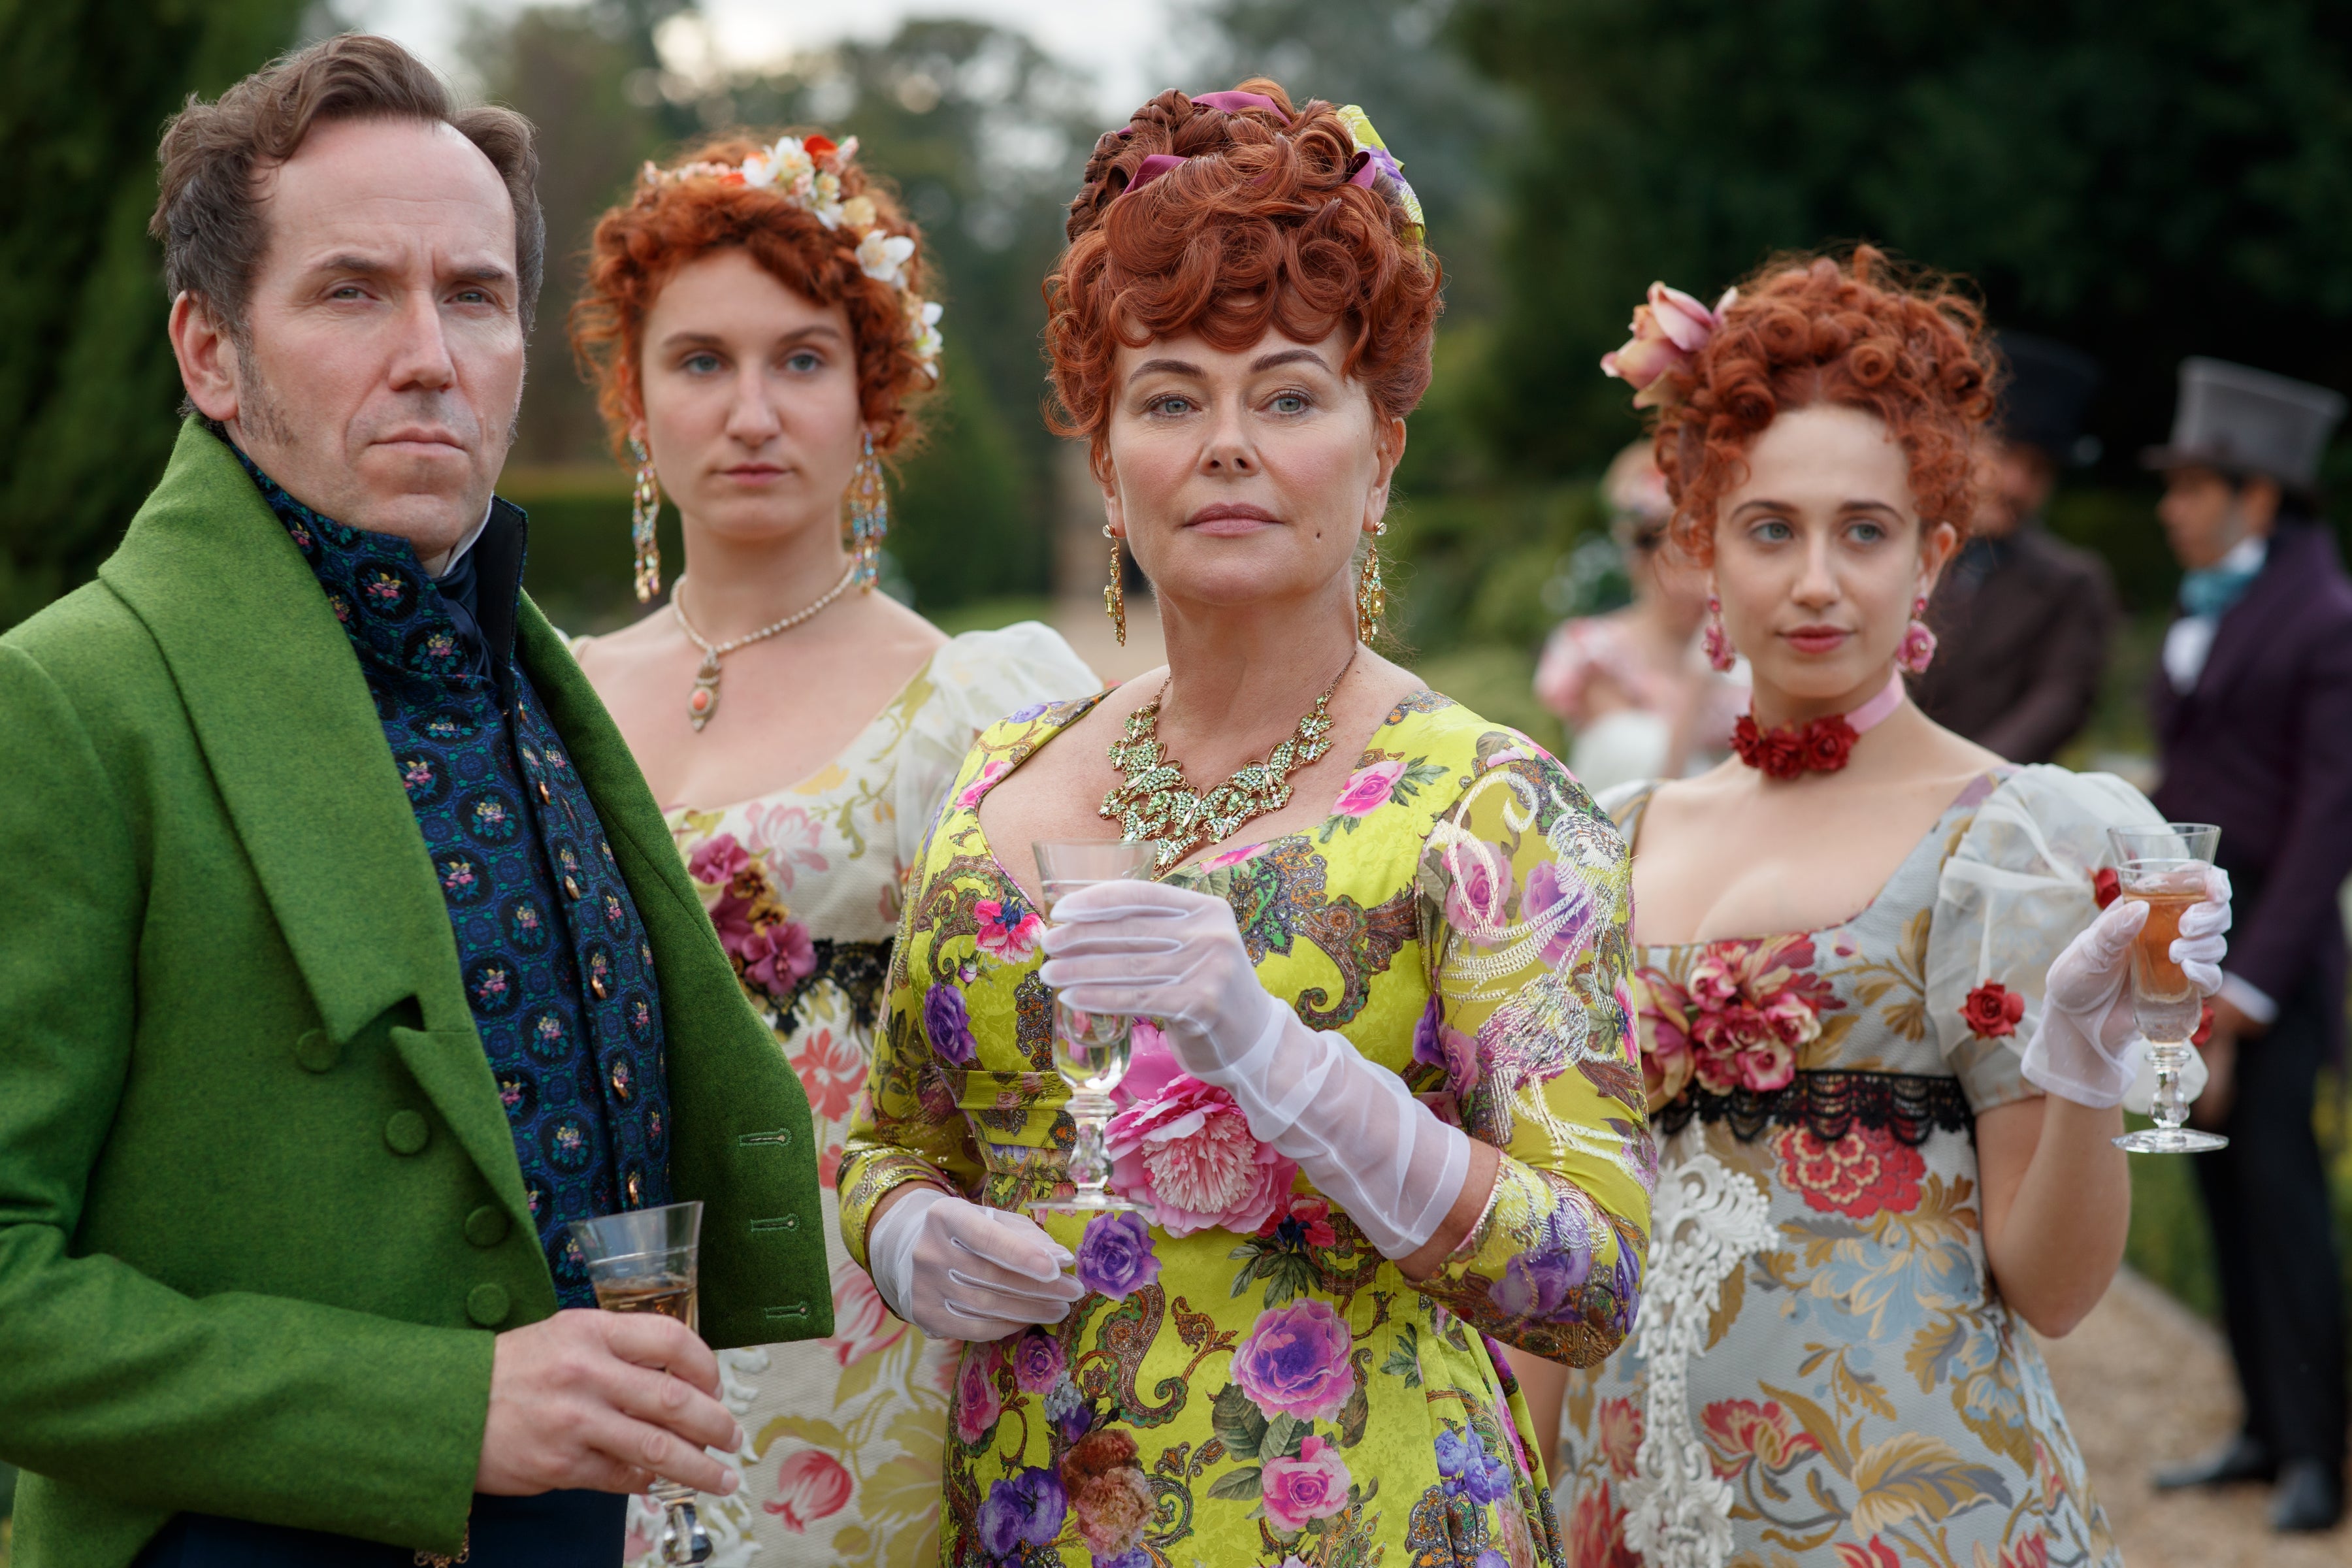 Ben Miller and Polly Walker stand with Bessie Carter and Harriet Cains behind them.